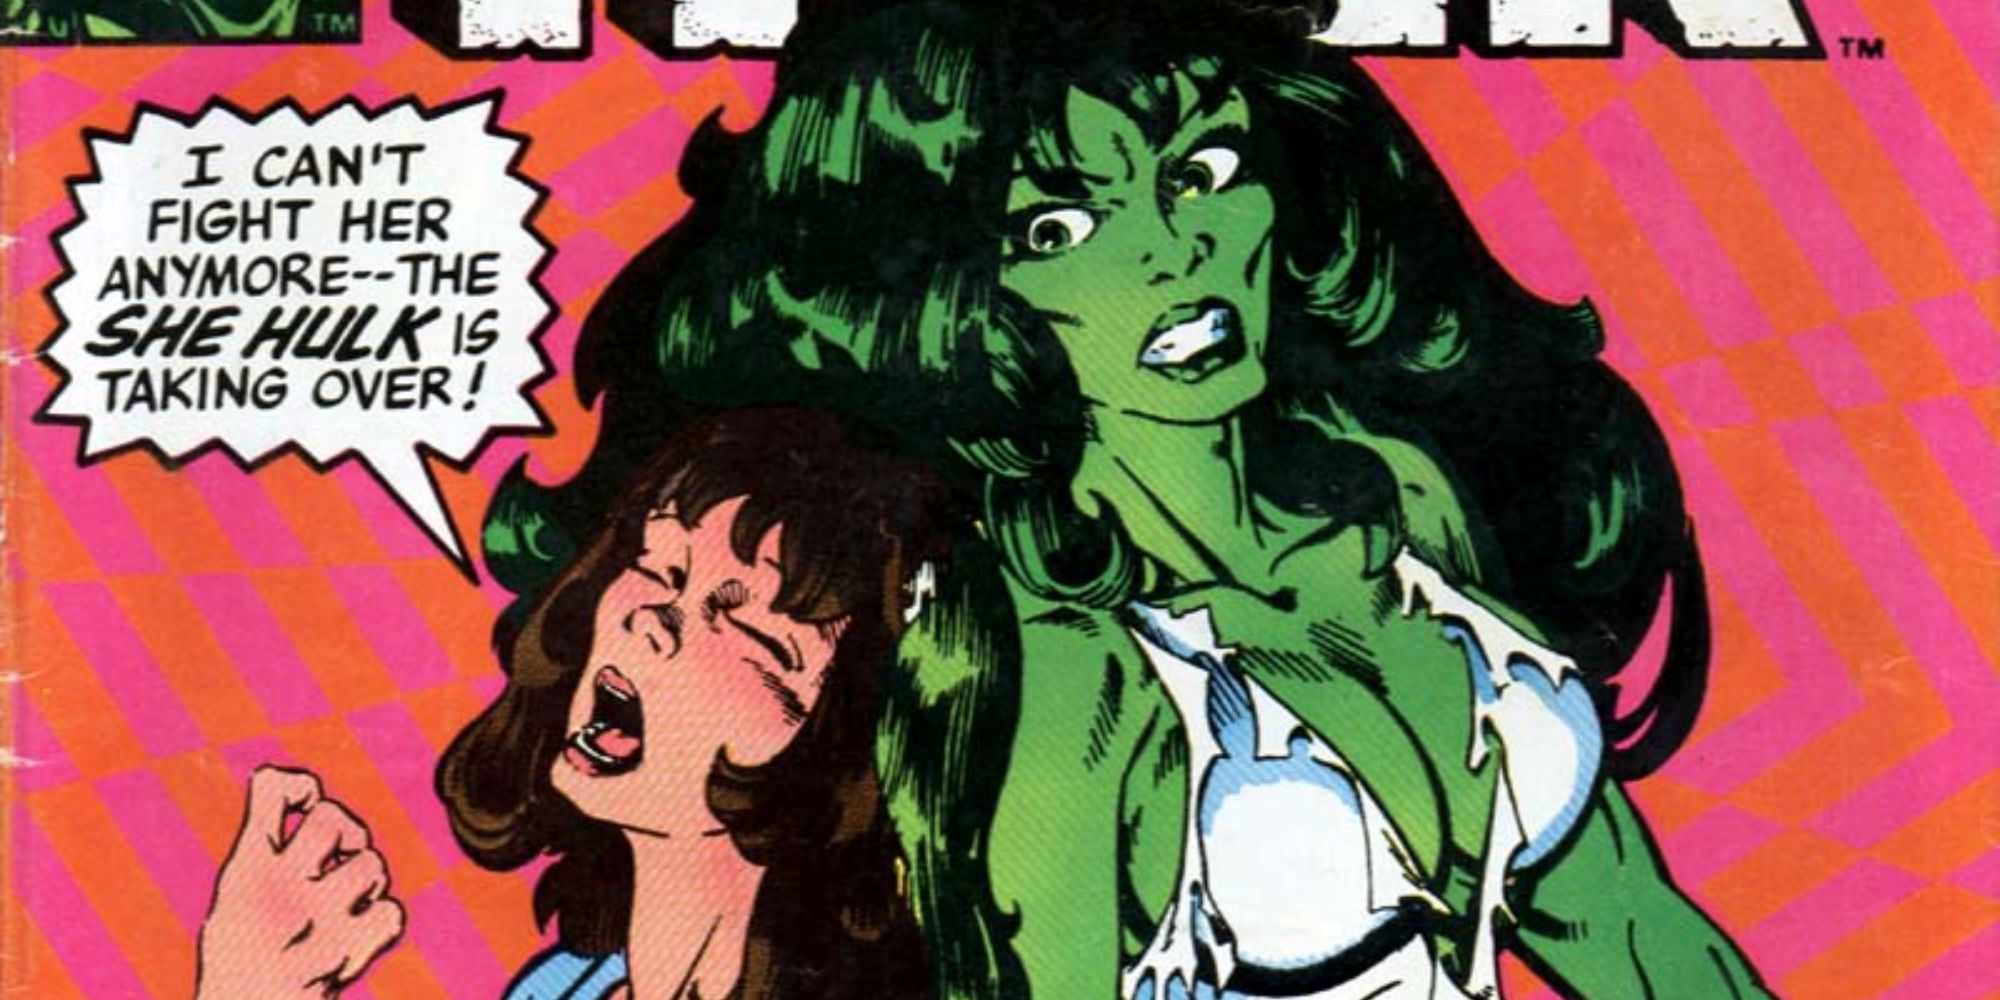 Jennifer Walters wrestles with her She-Hulk persona in Marvel comics.